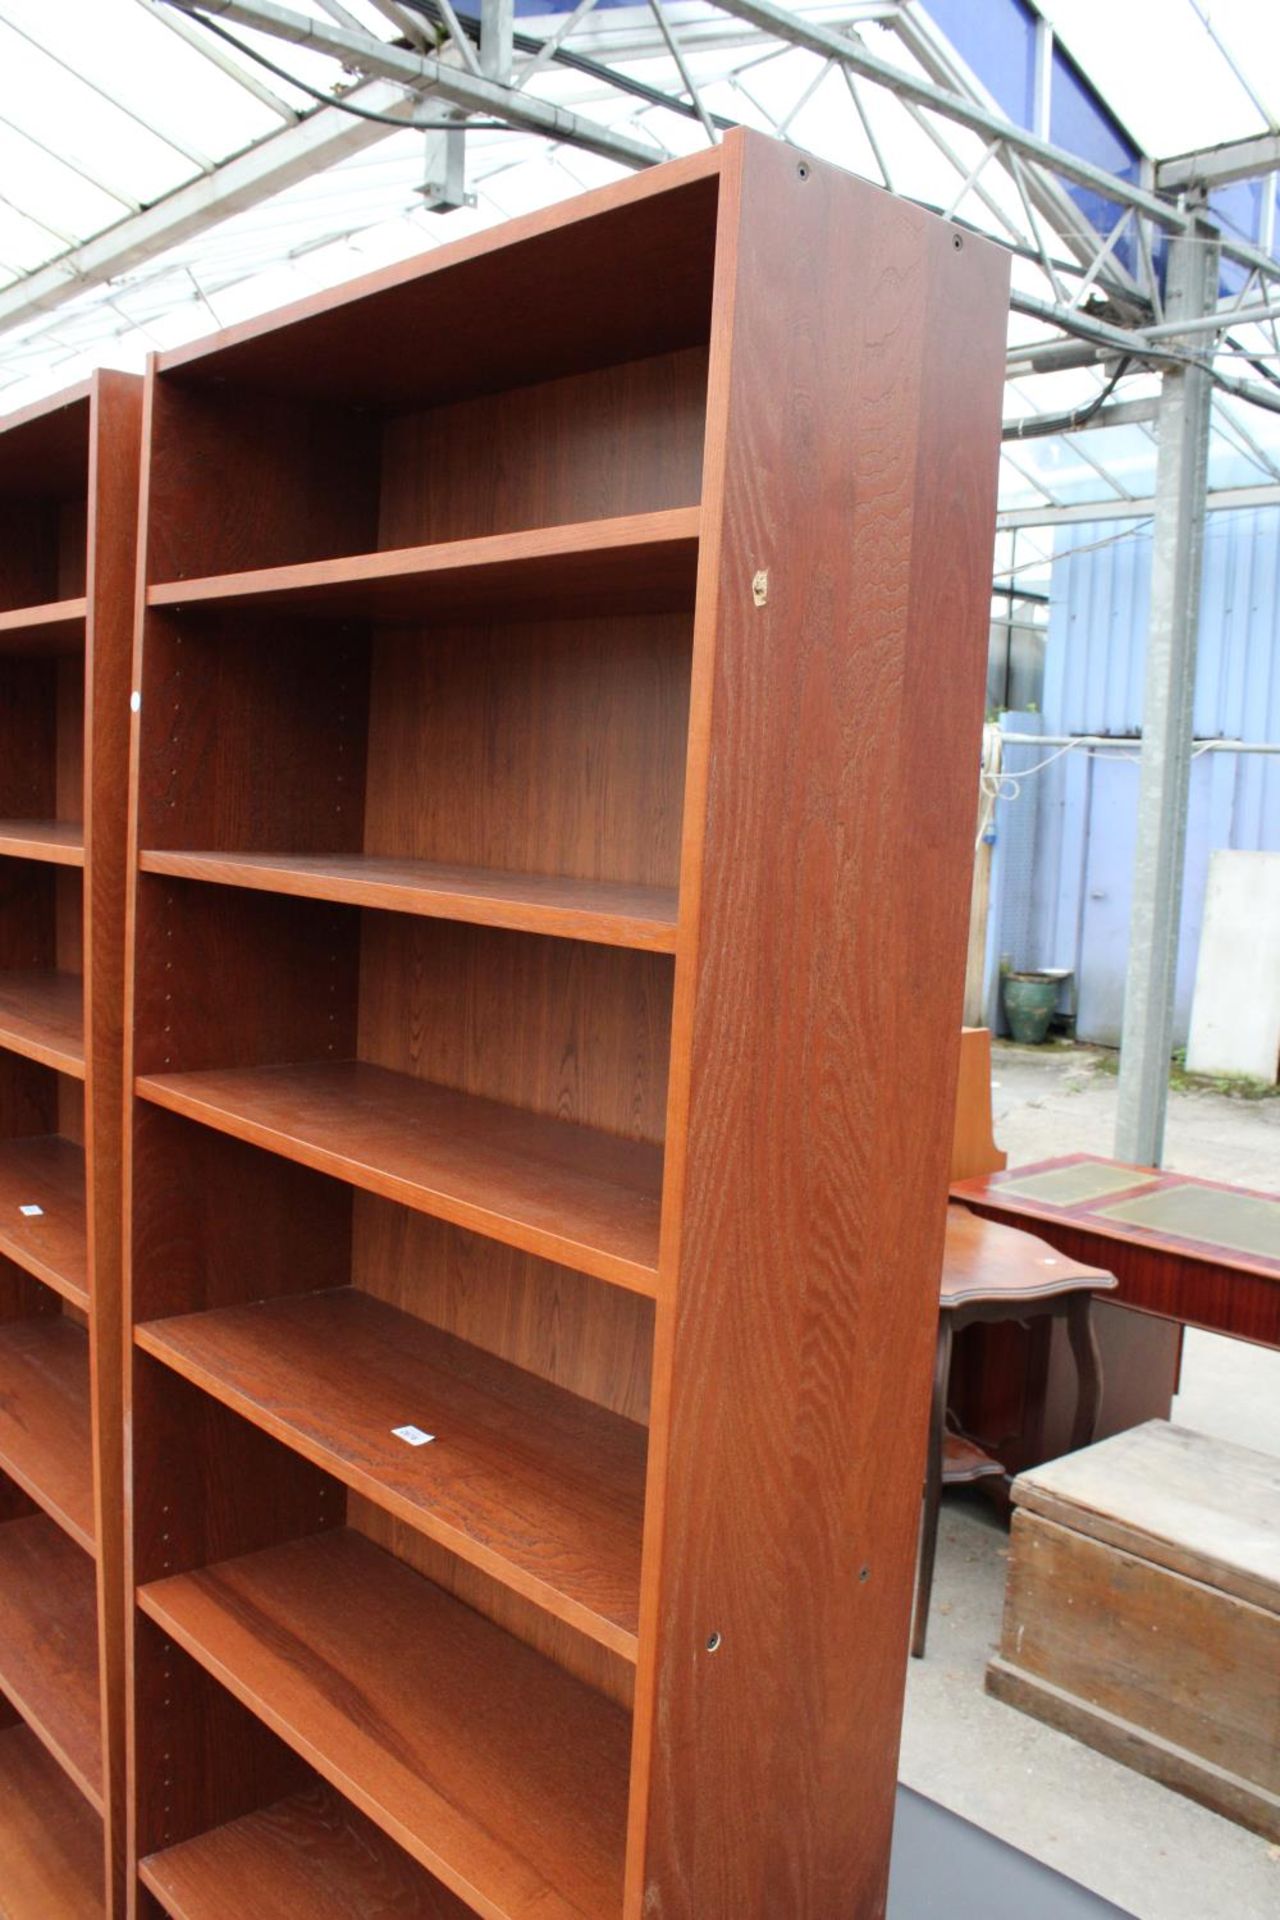 A MODERN SEVEN TIER OPEN BOOKCASE, 32" WIDE - Image 2 of 3